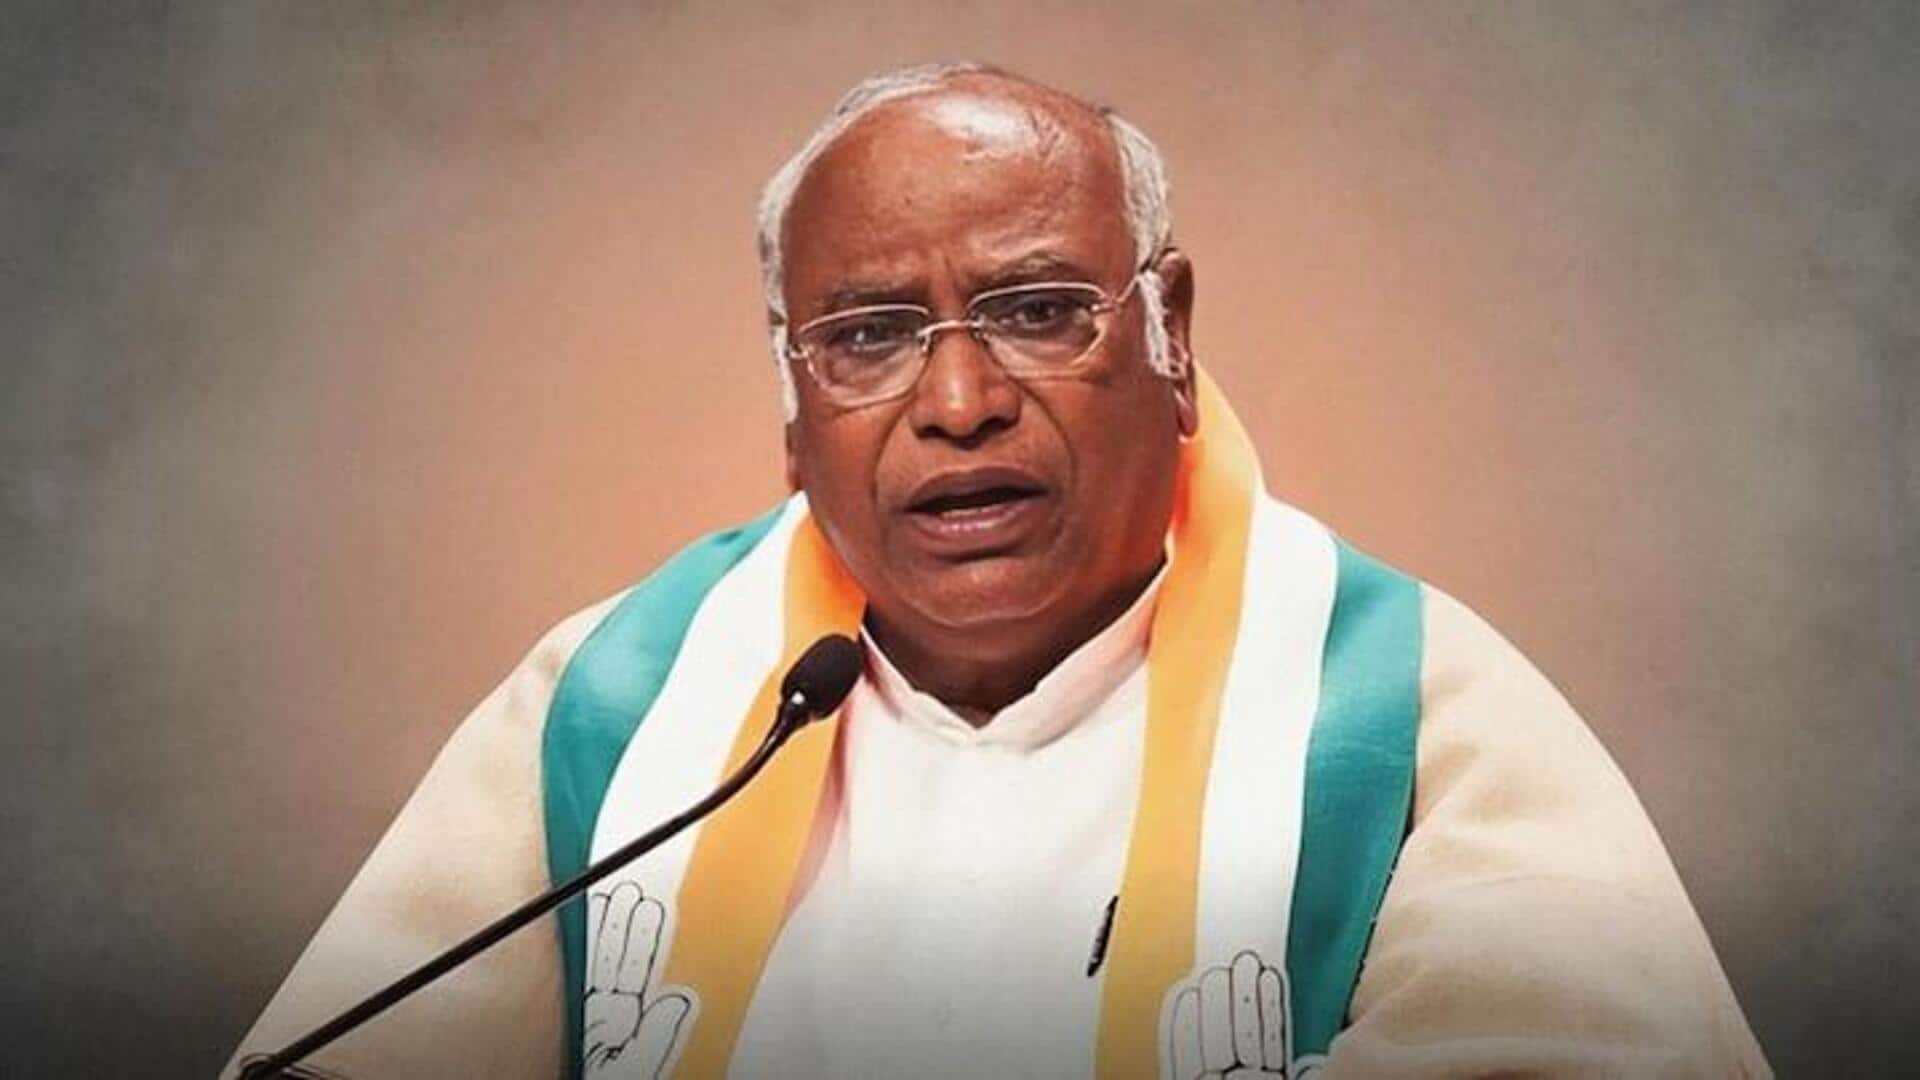 Congress will increase manufacturing share in GDP to 20%: Kharge 